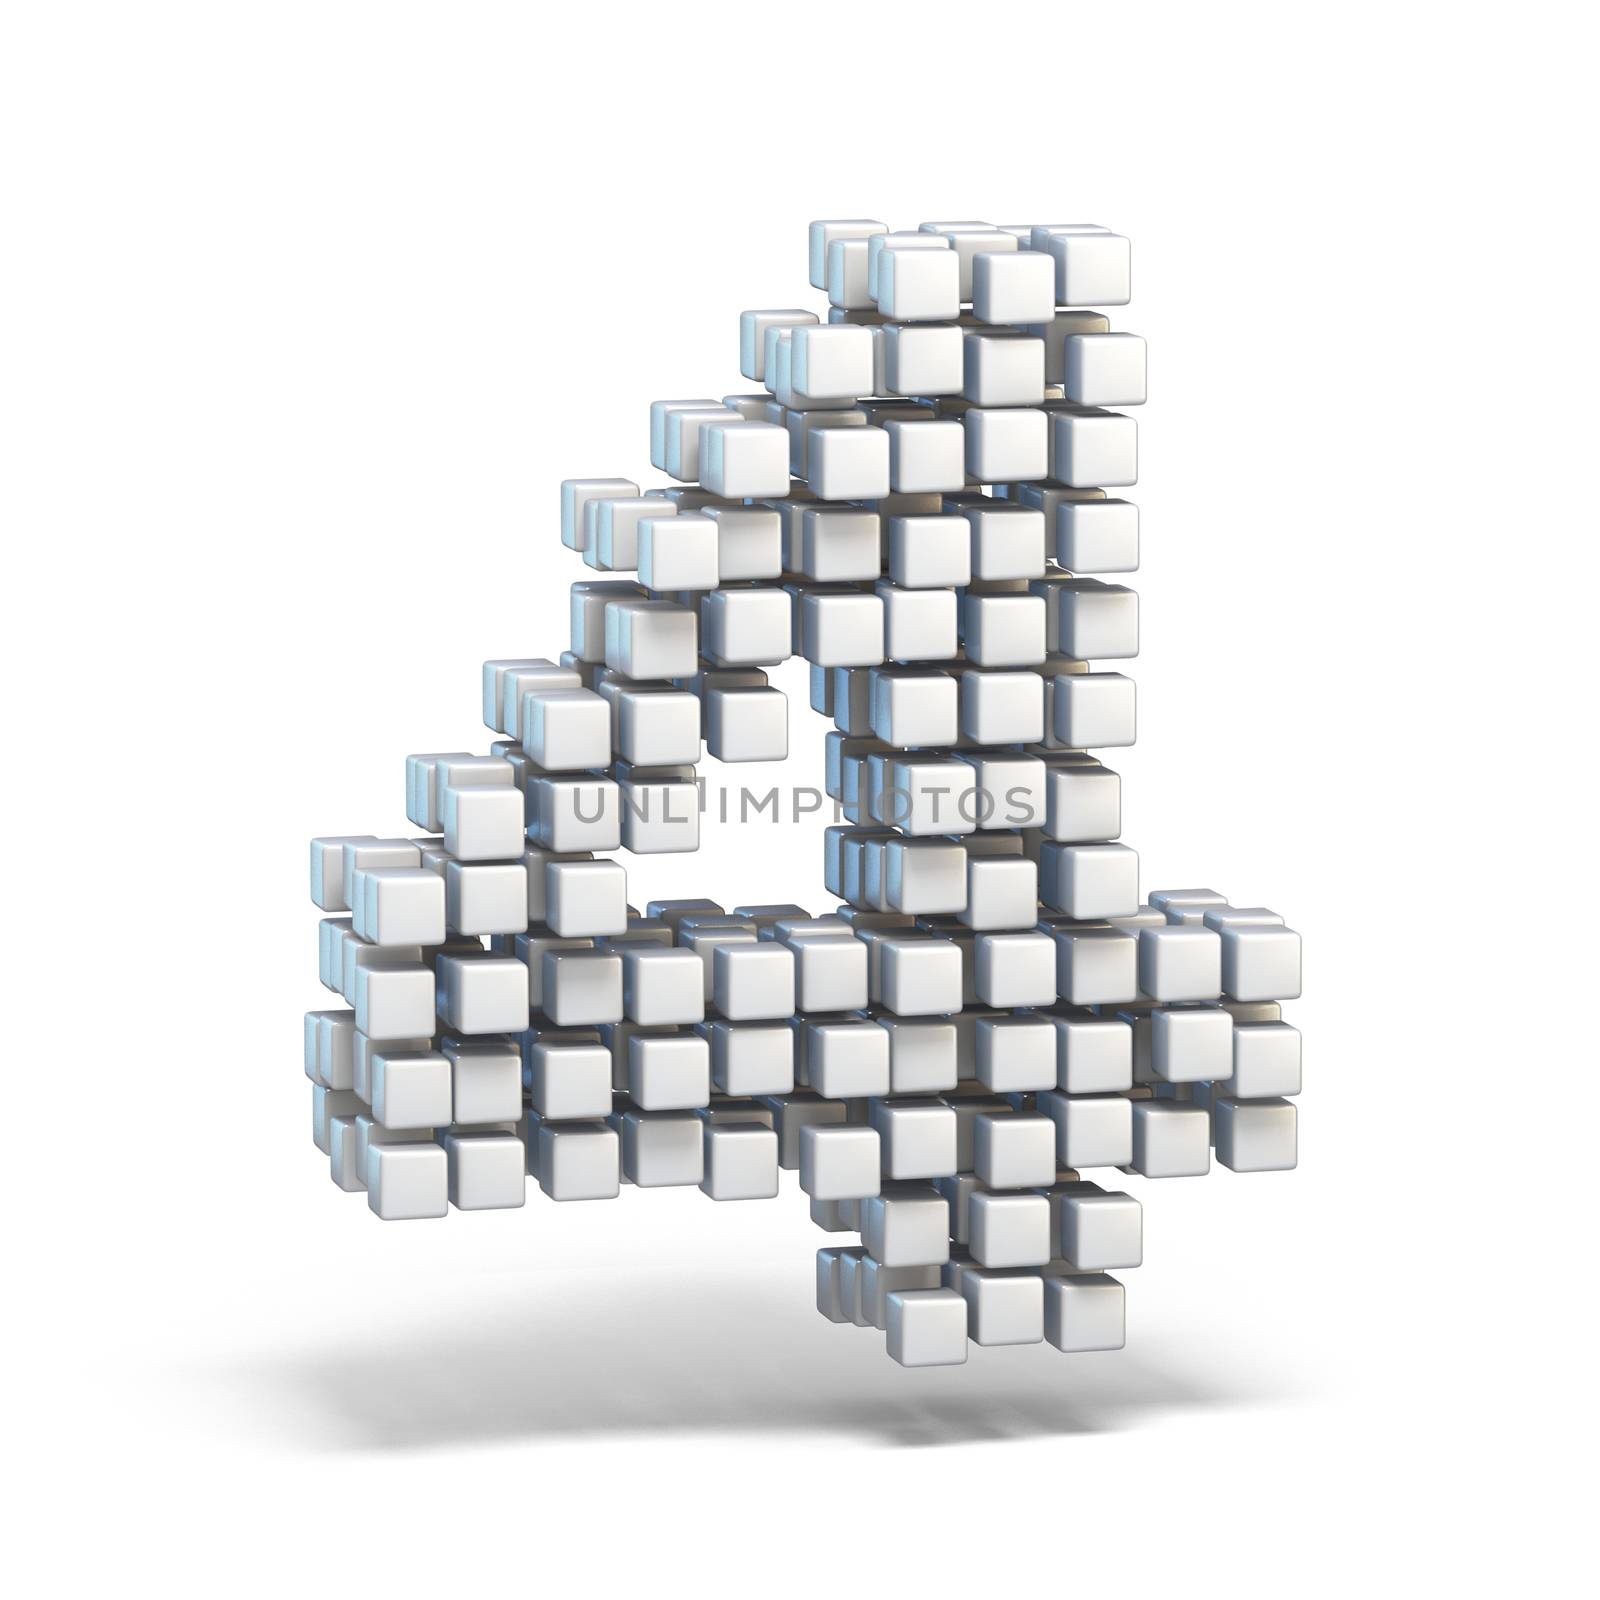 White voxel cubes font Number 4 FOUR 3D render illustration isolated on white background